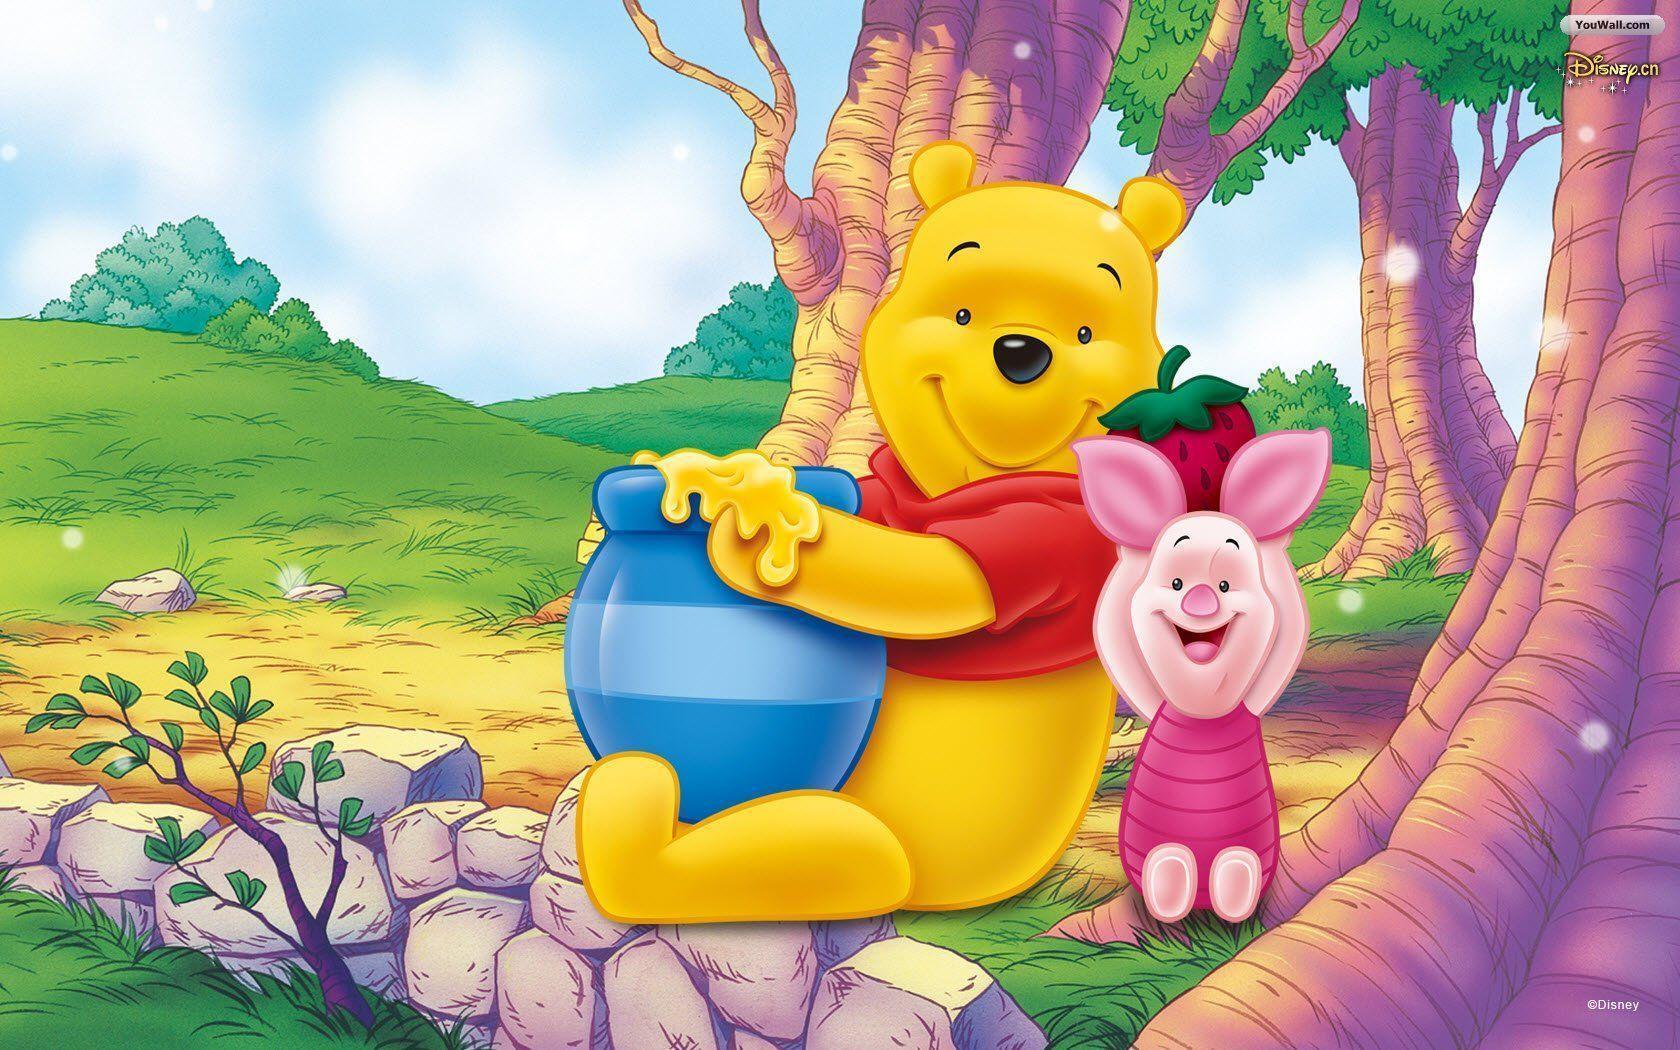 Winnie The Pooh and Friends Wallpaper Free For Desktop. Cartoons